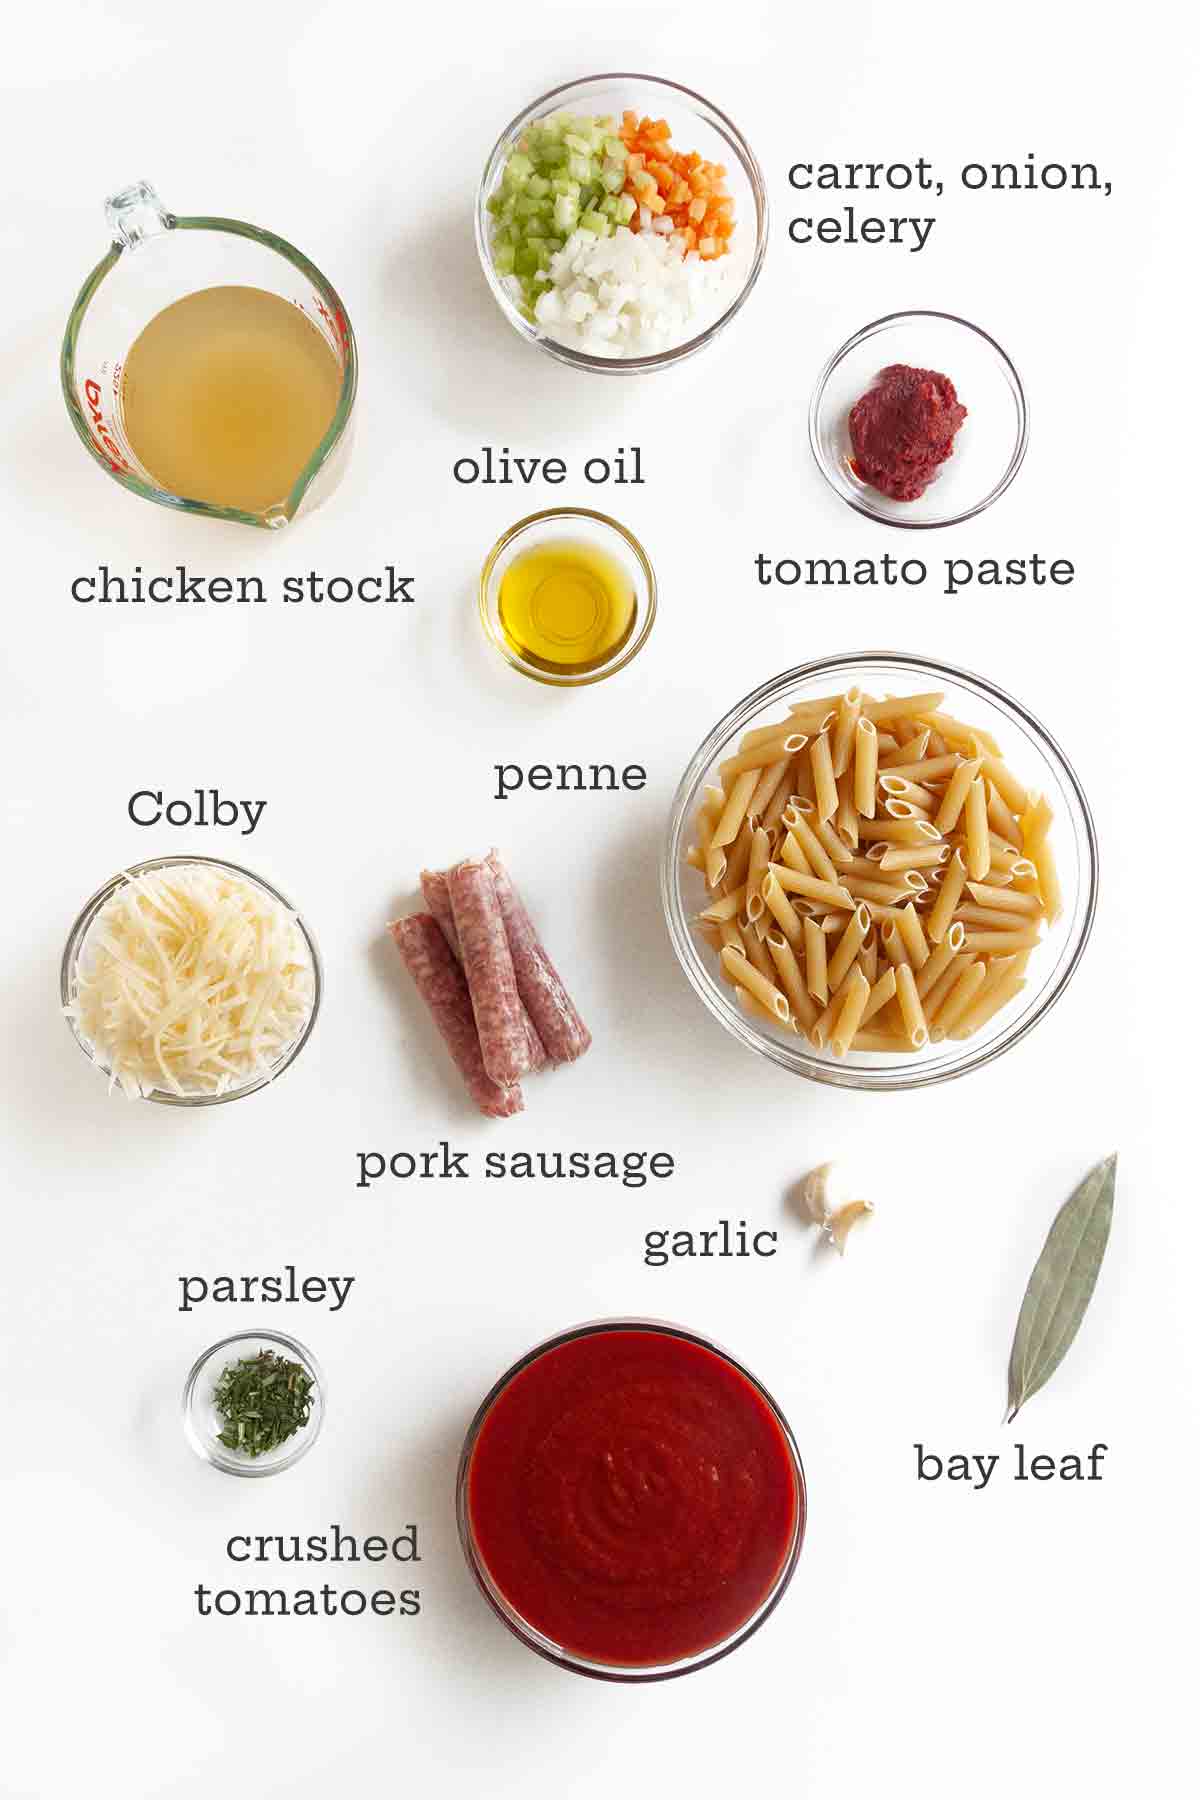 Ingredients for one-pot pasta with sausage meatballs--pasta, vegetables, sausage, stock, crushed tomatoes, tomato past, cheese, garlic, and bay leaf.